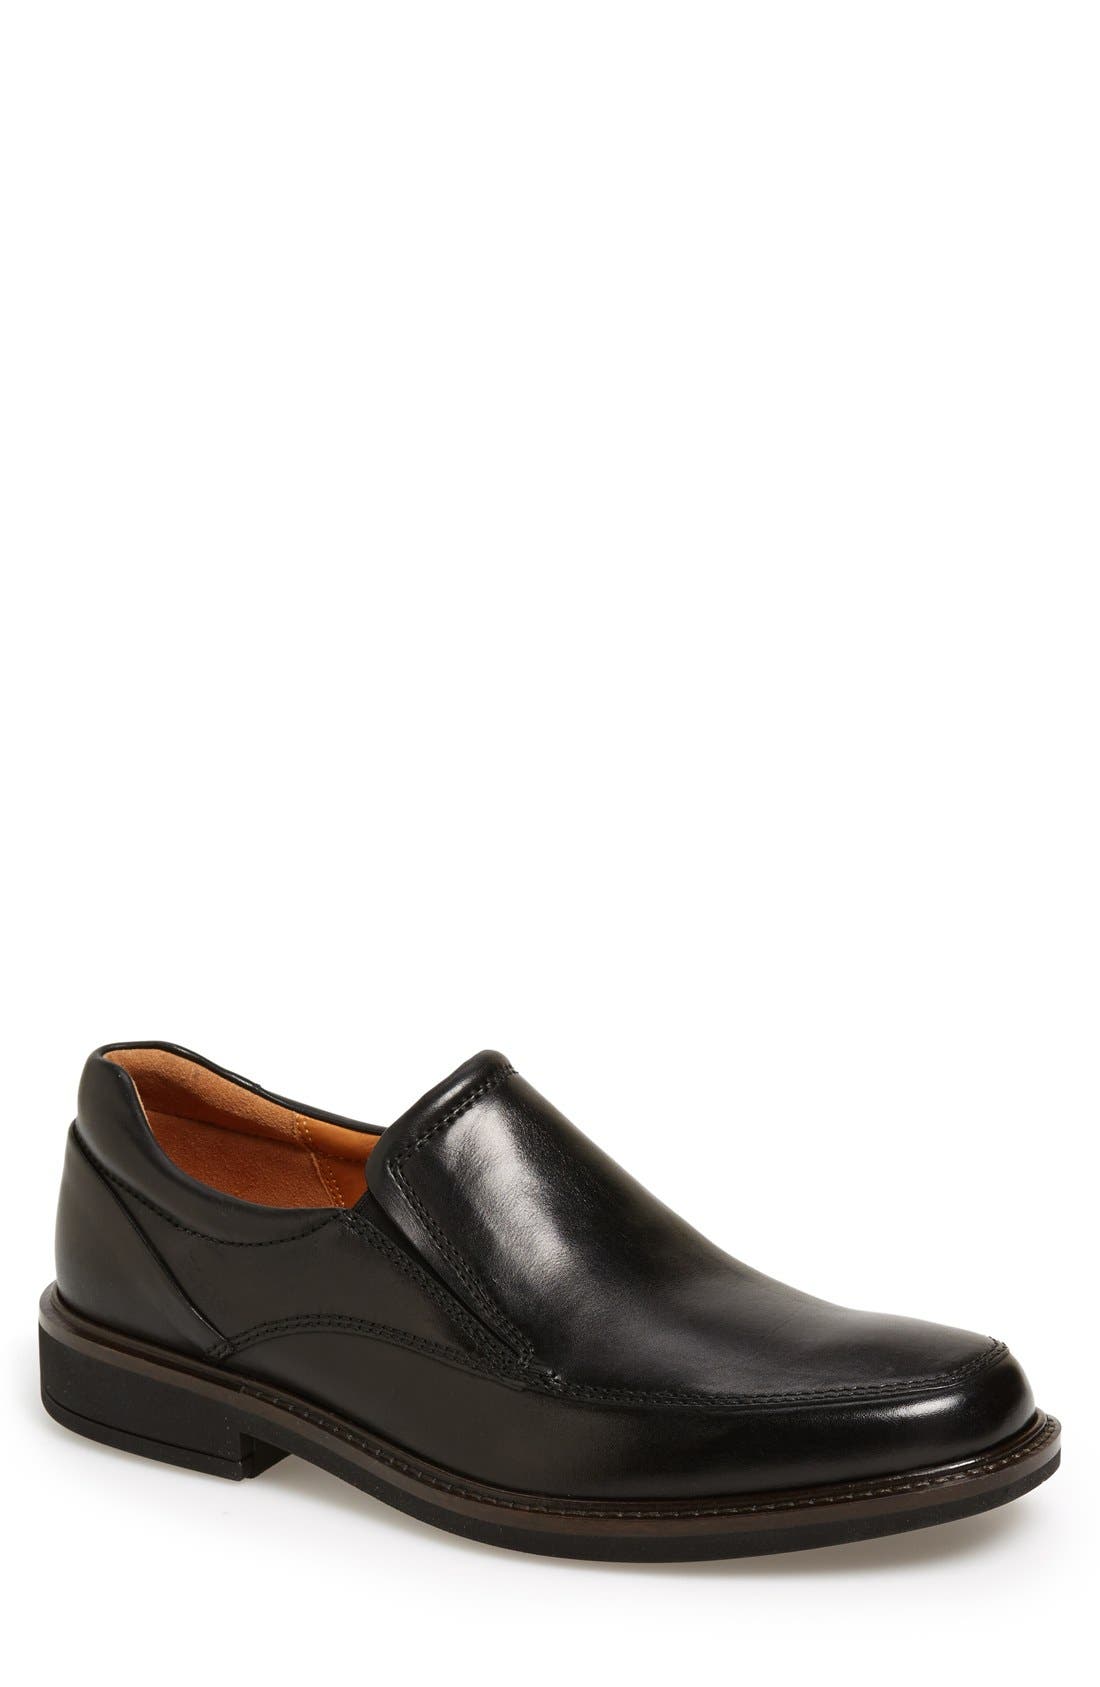 UPC 737431112100 product image for ECCO Holton Slip-On in Black Leather at Nordstrom, Size 6-6.5Us | upcitemdb.com